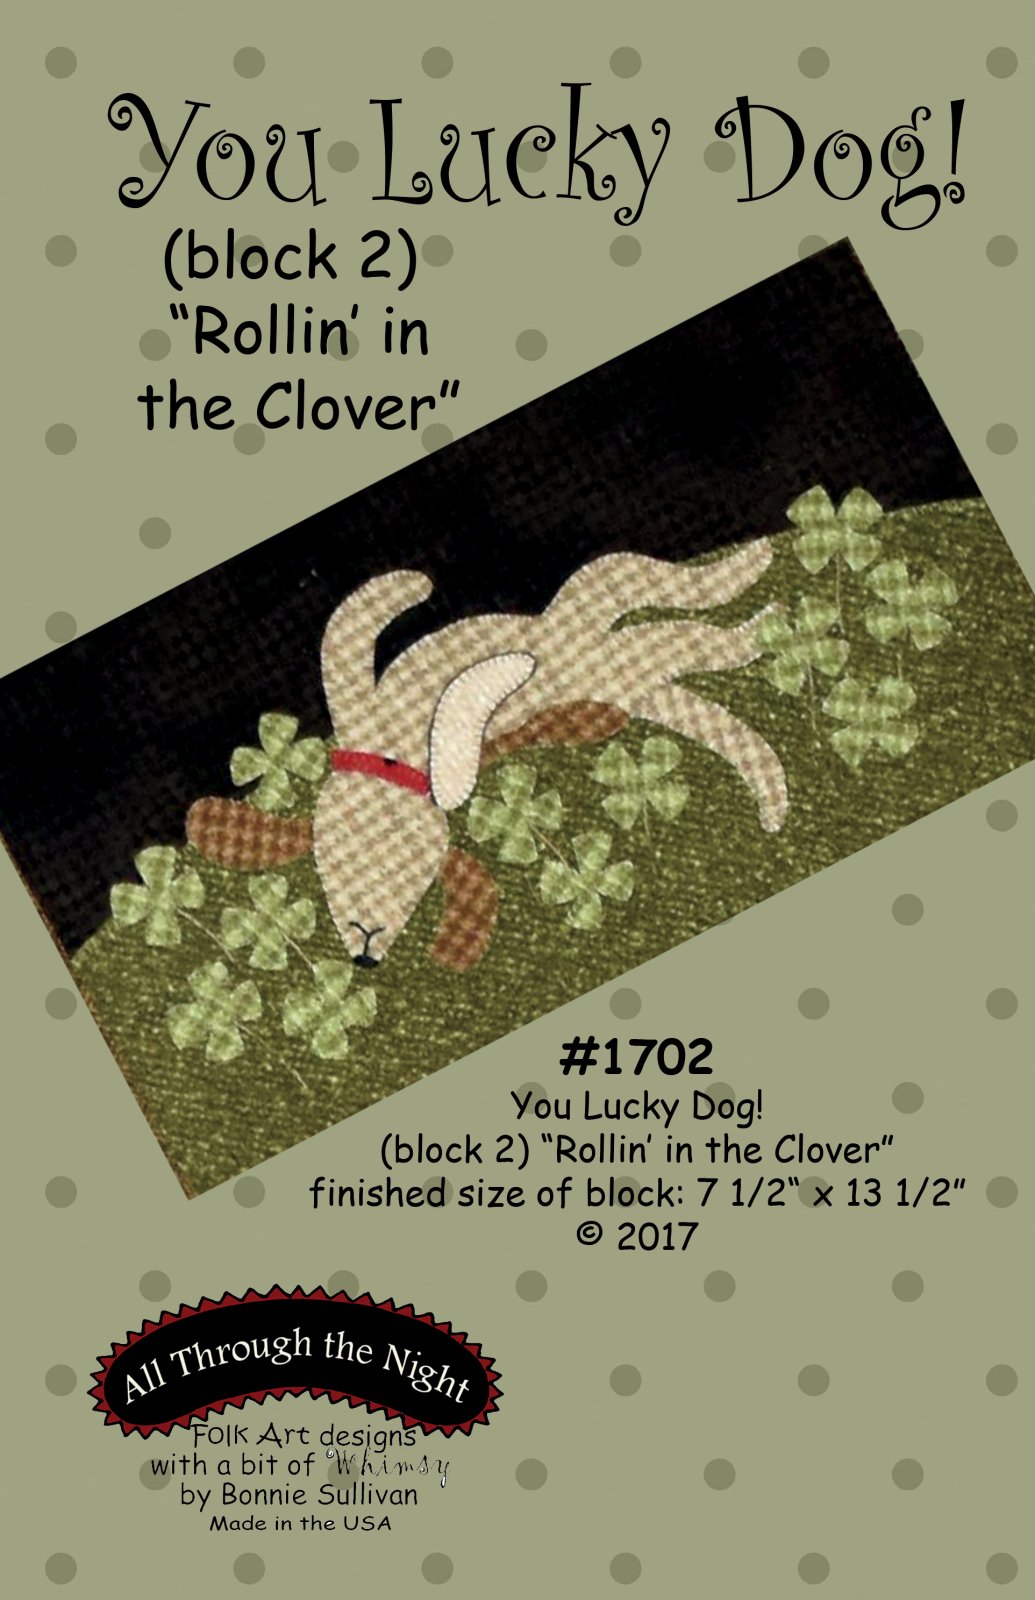 1702 - You Lucky Dog! "Rollin' in the Clover"